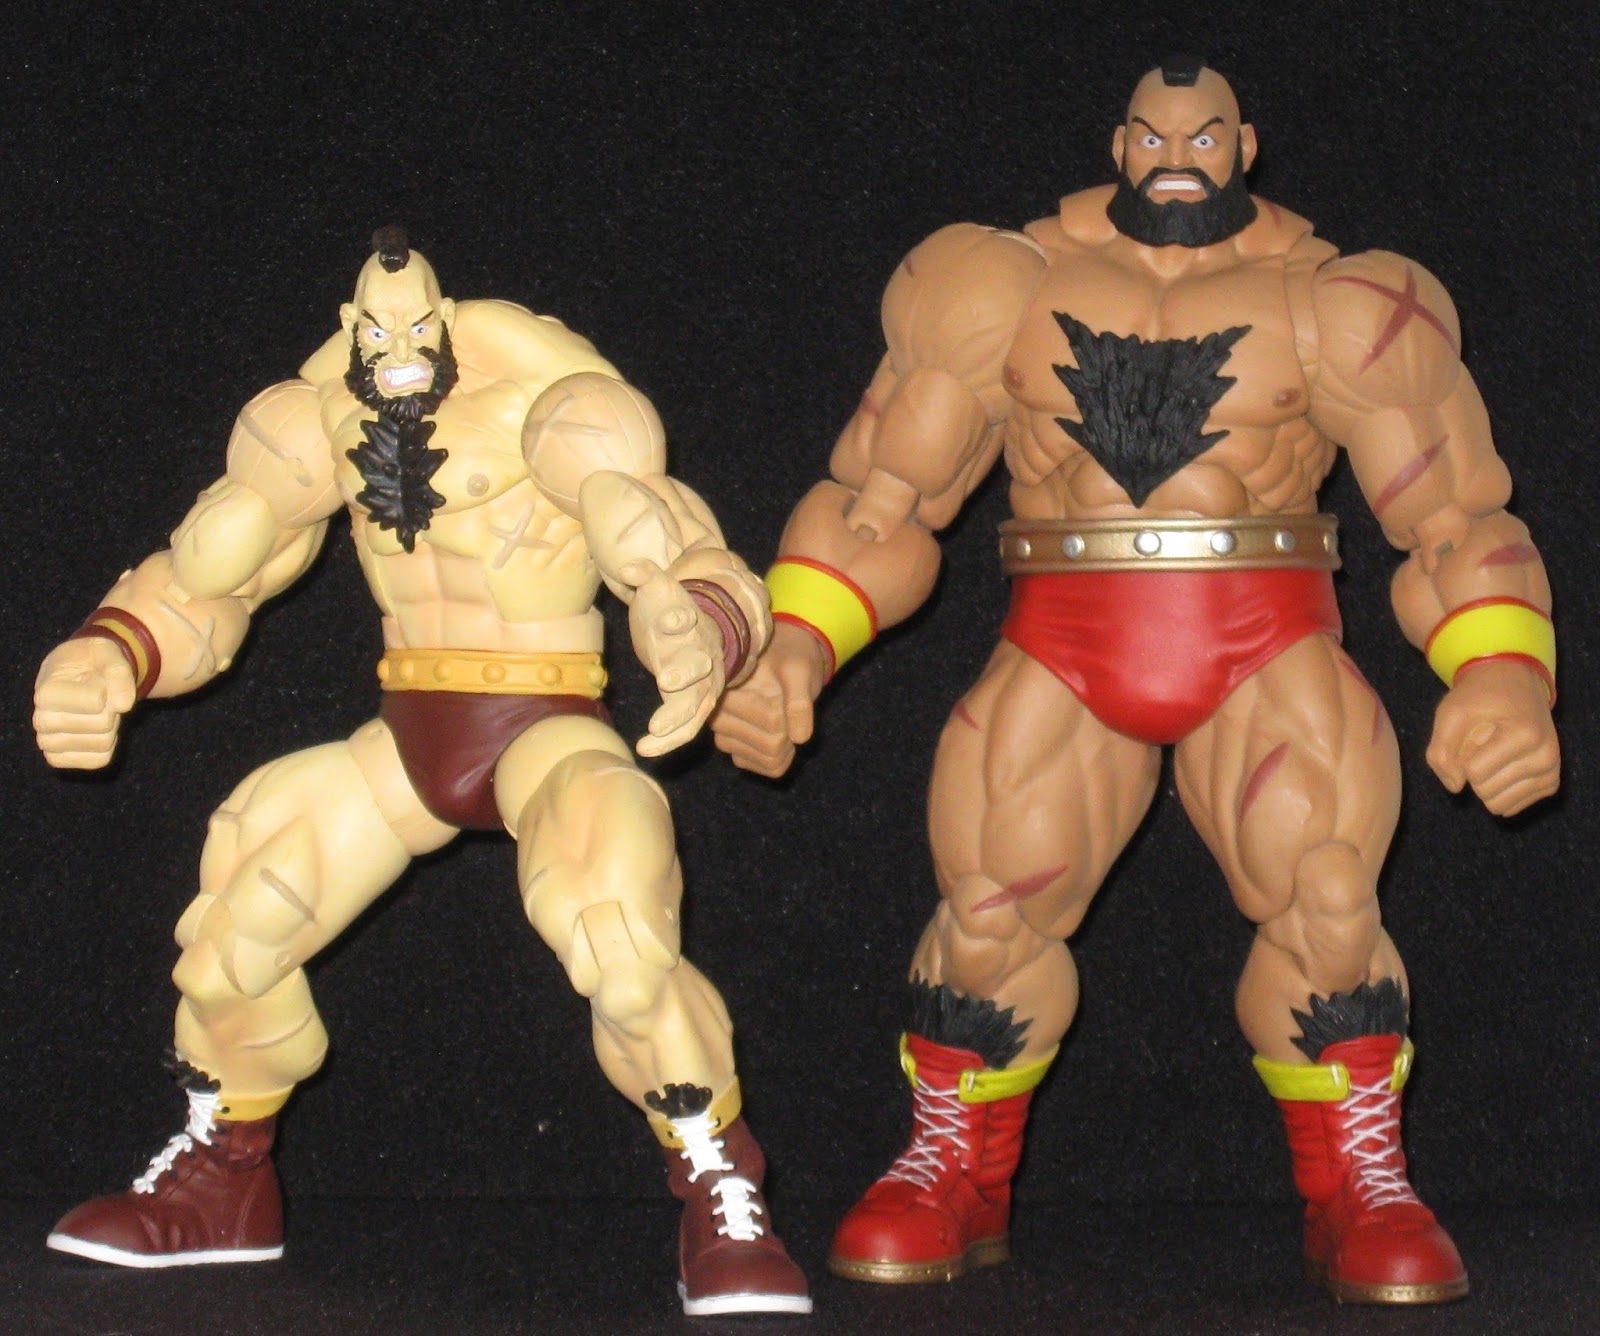 Street Fighter V: Zangief Storm Collectibles